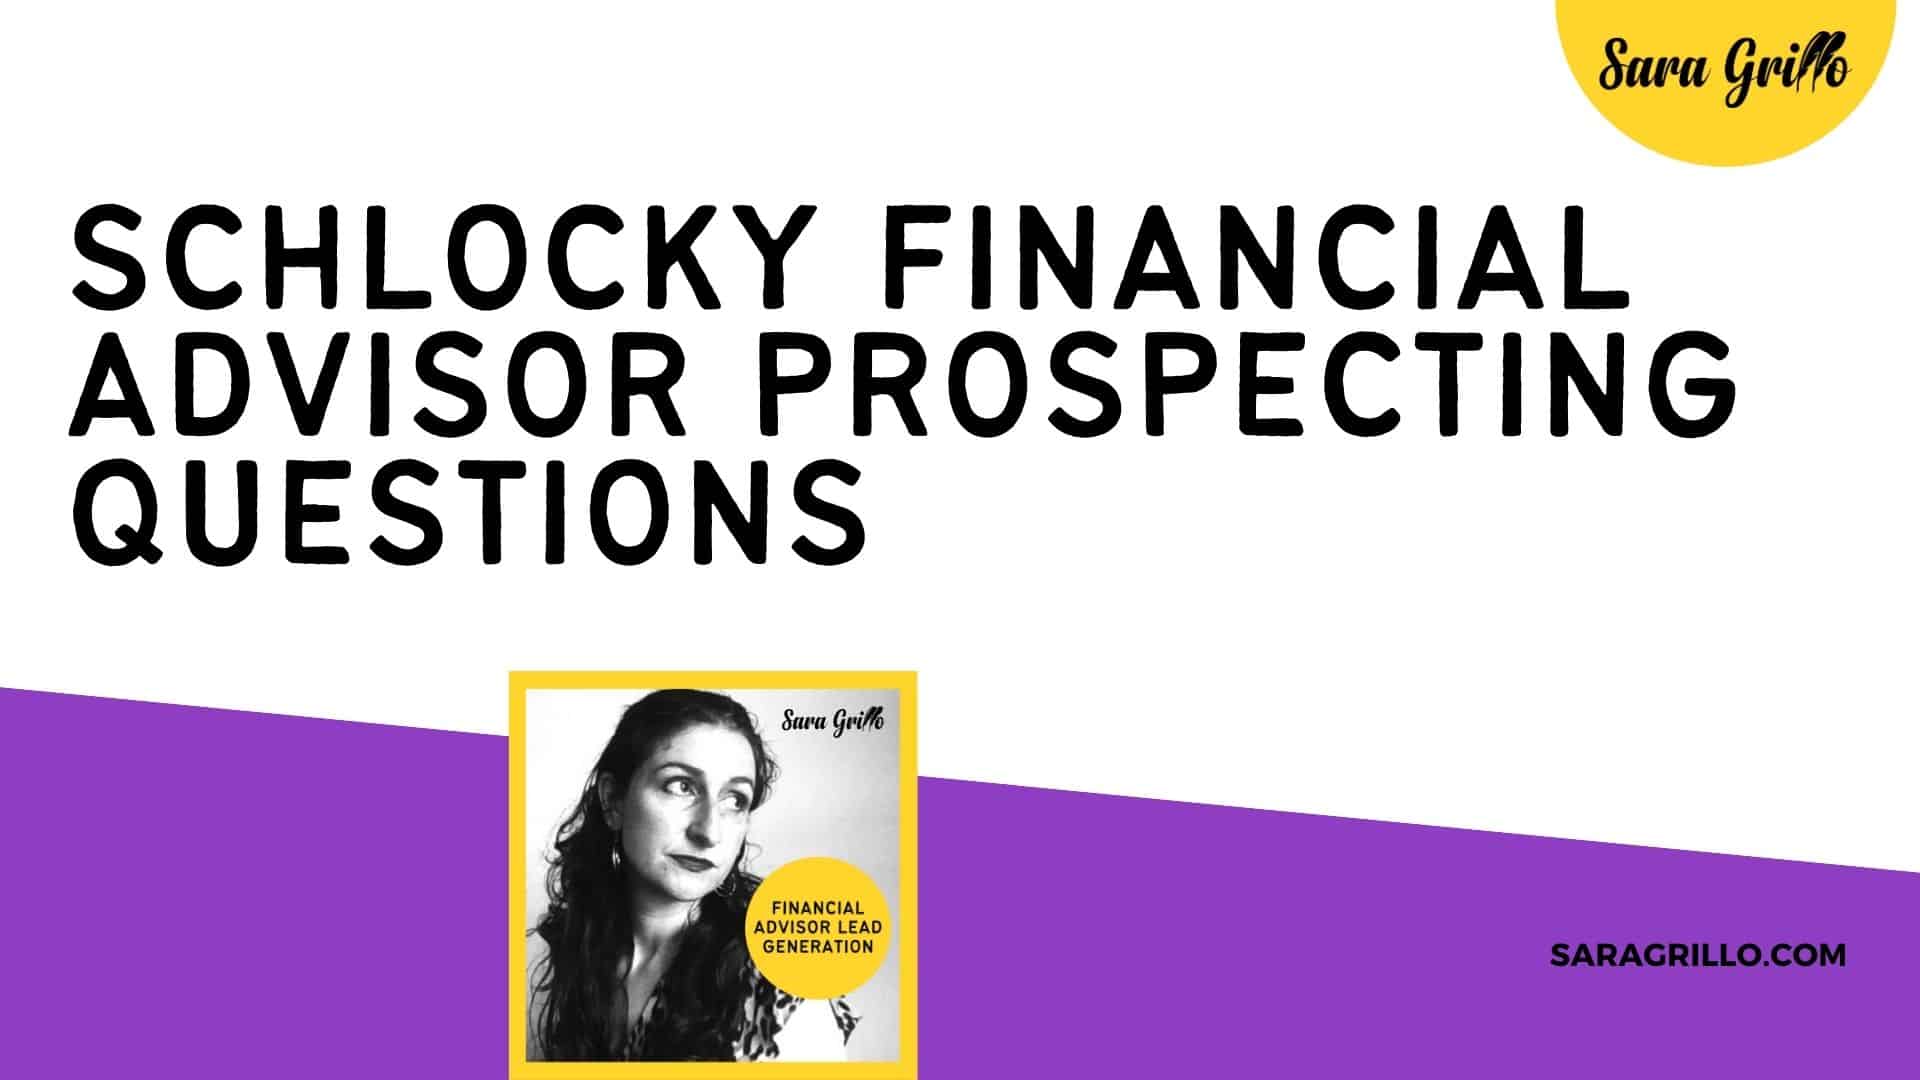 Avoid these bad financial advisor prospecting questions and ask good ones instead!